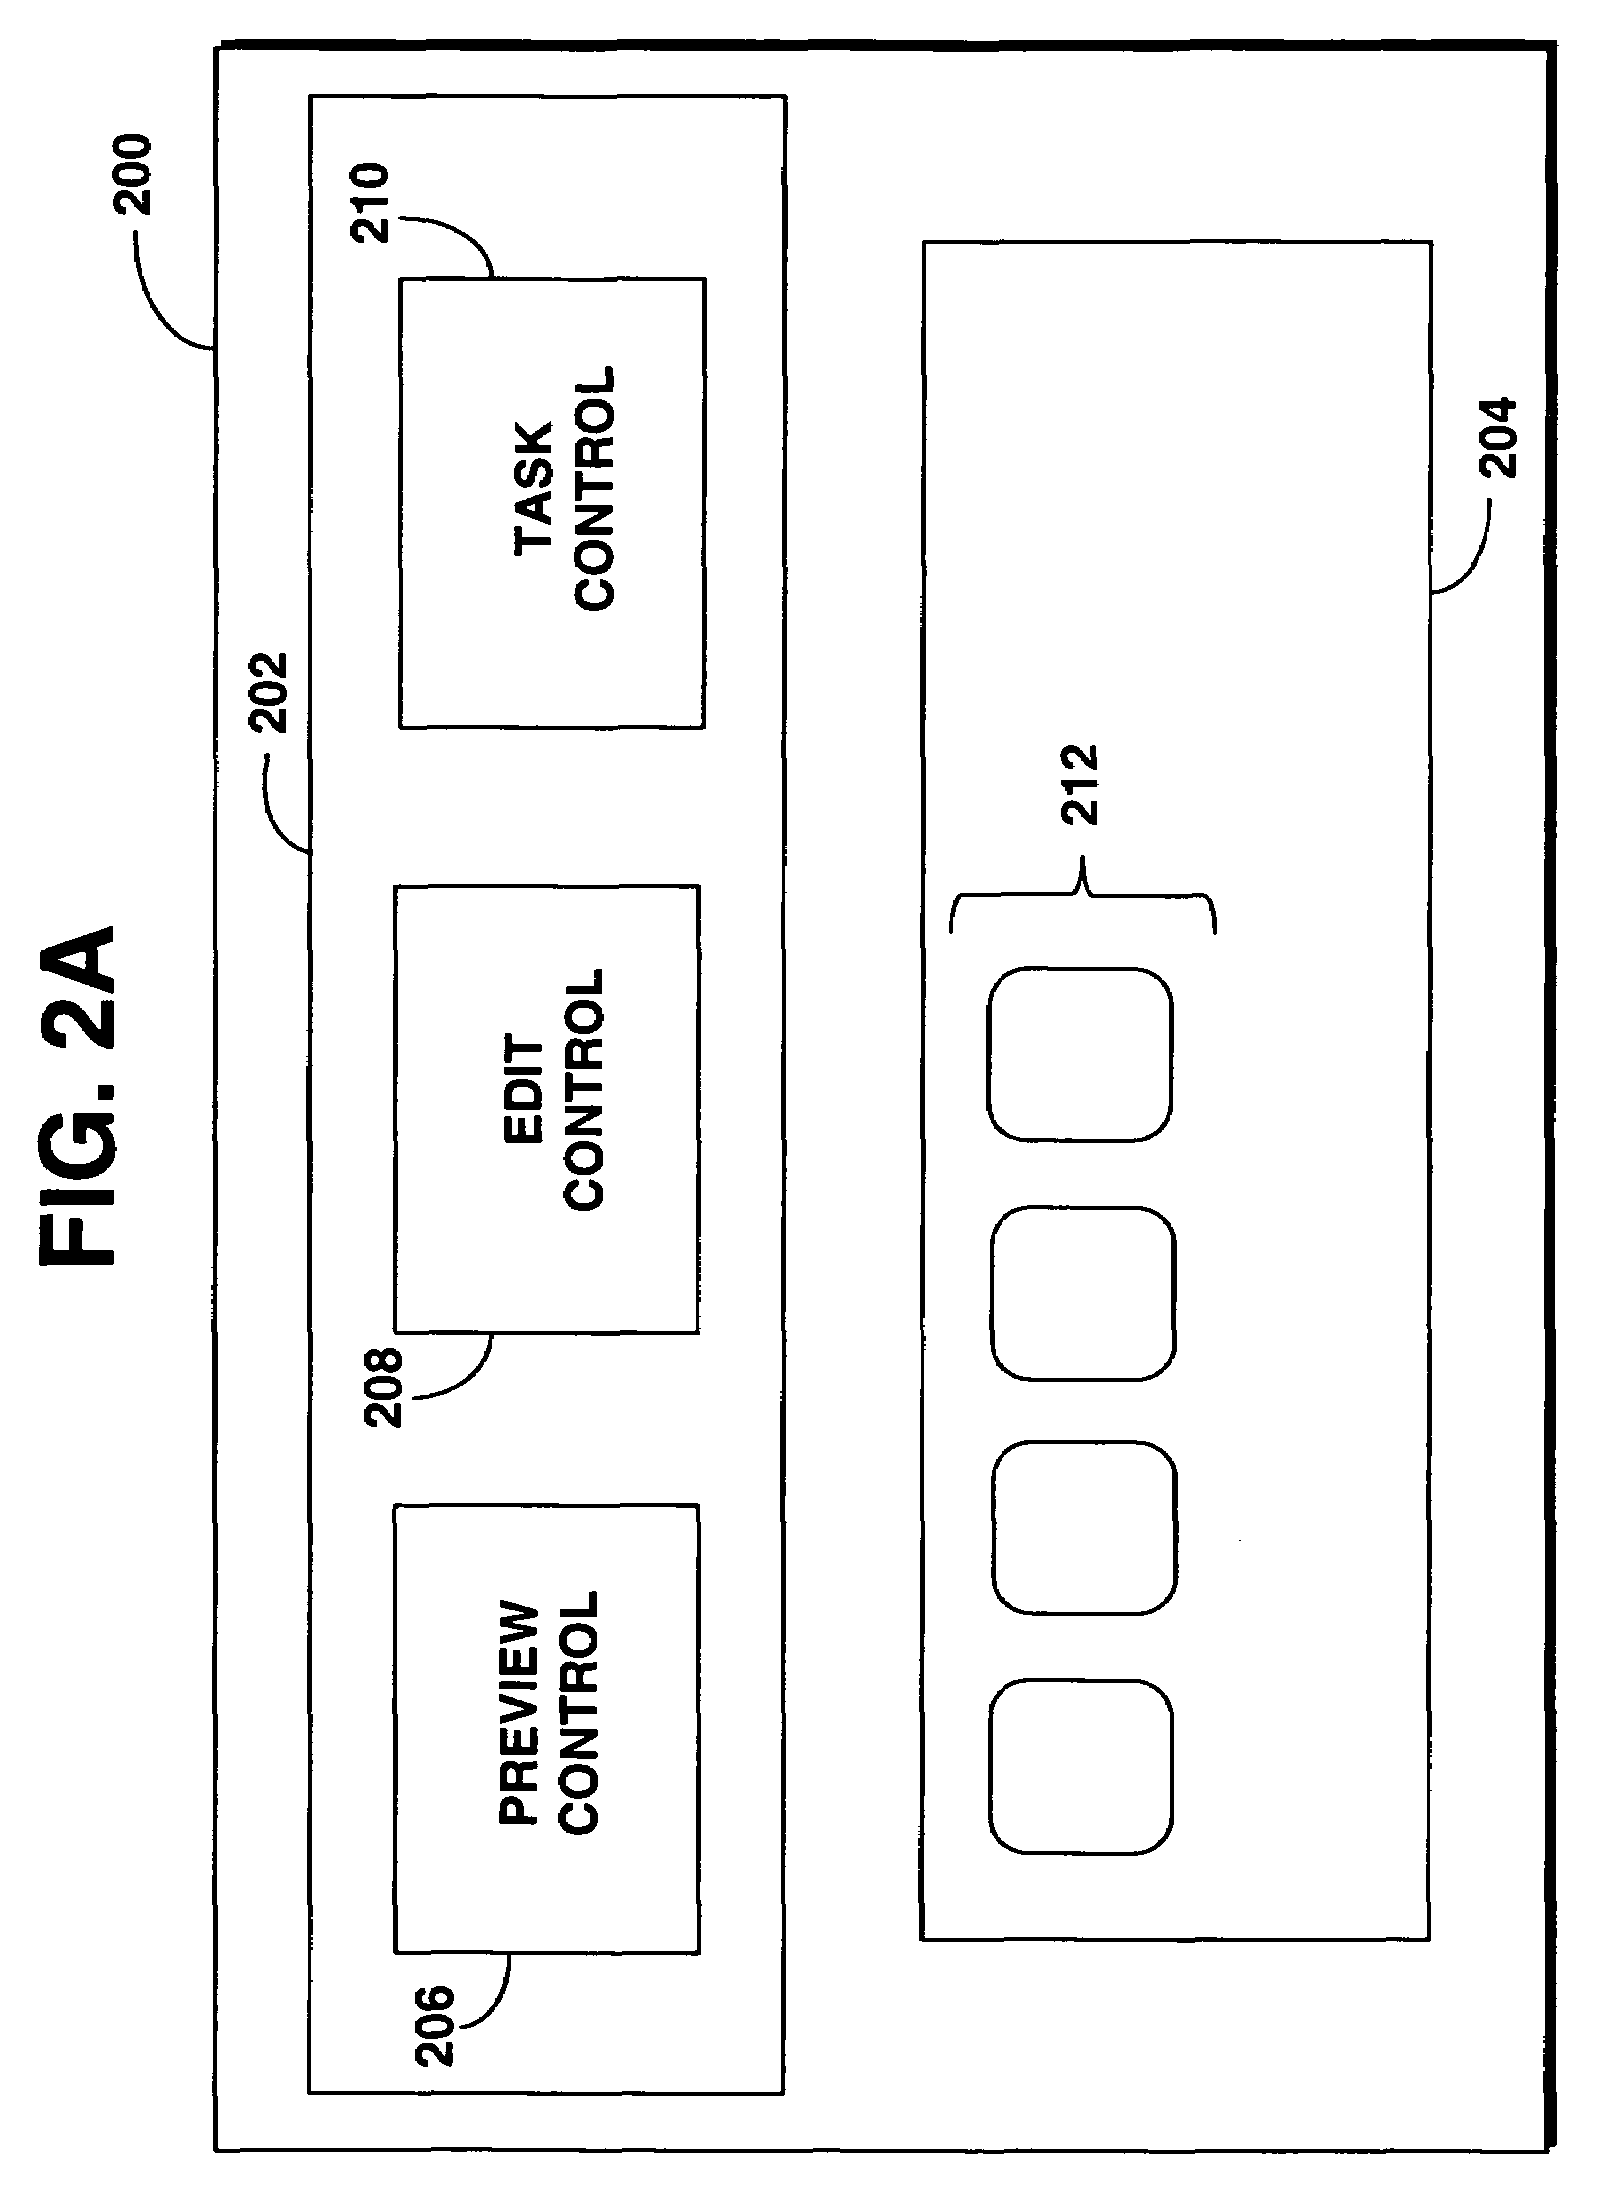 System and method for viewing and editing multi-value properties